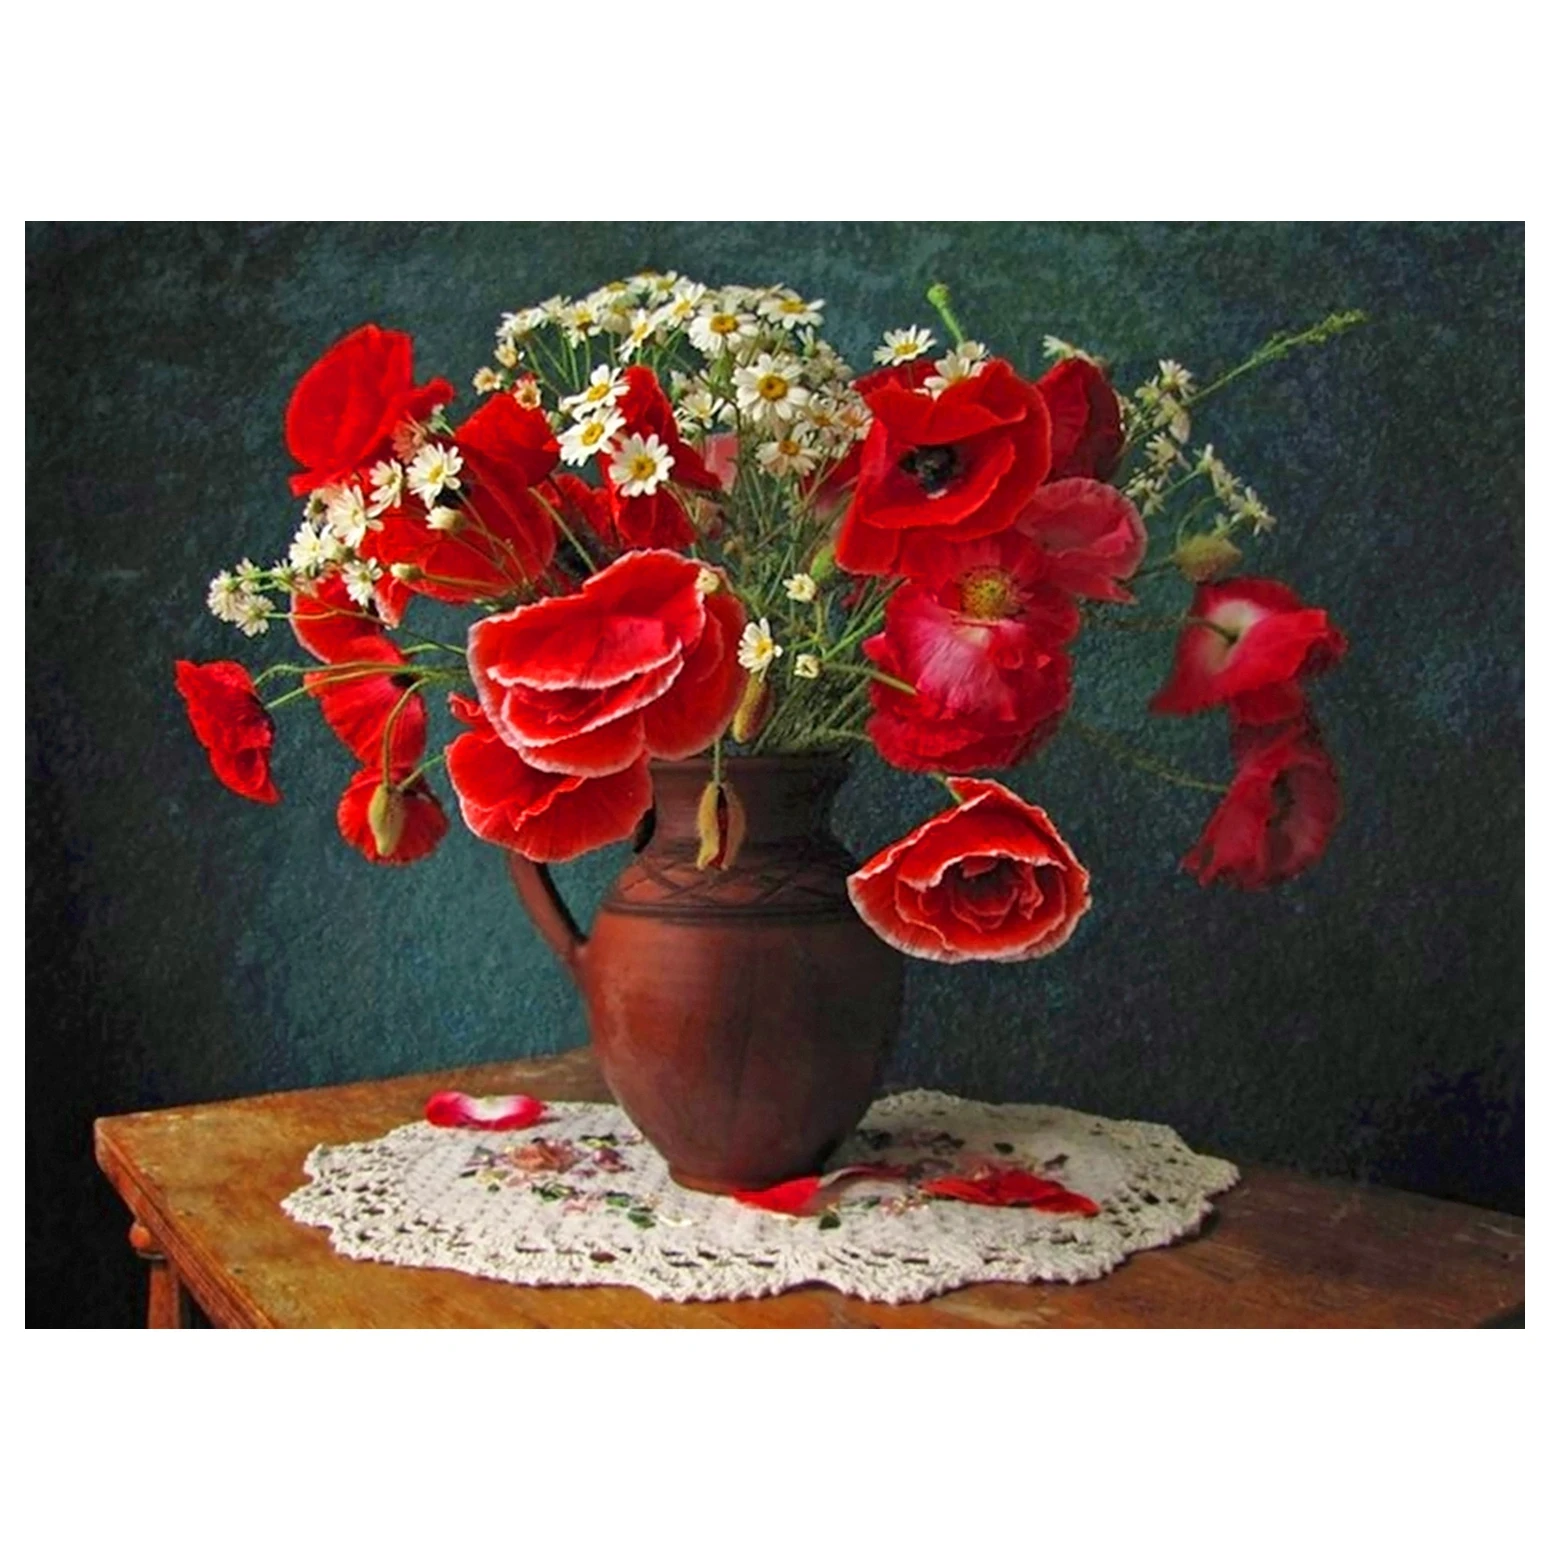 DIY Beaded Embroidery Kits Red Poppies High Max 80% OFF Beadwork Bea Quality Purchase